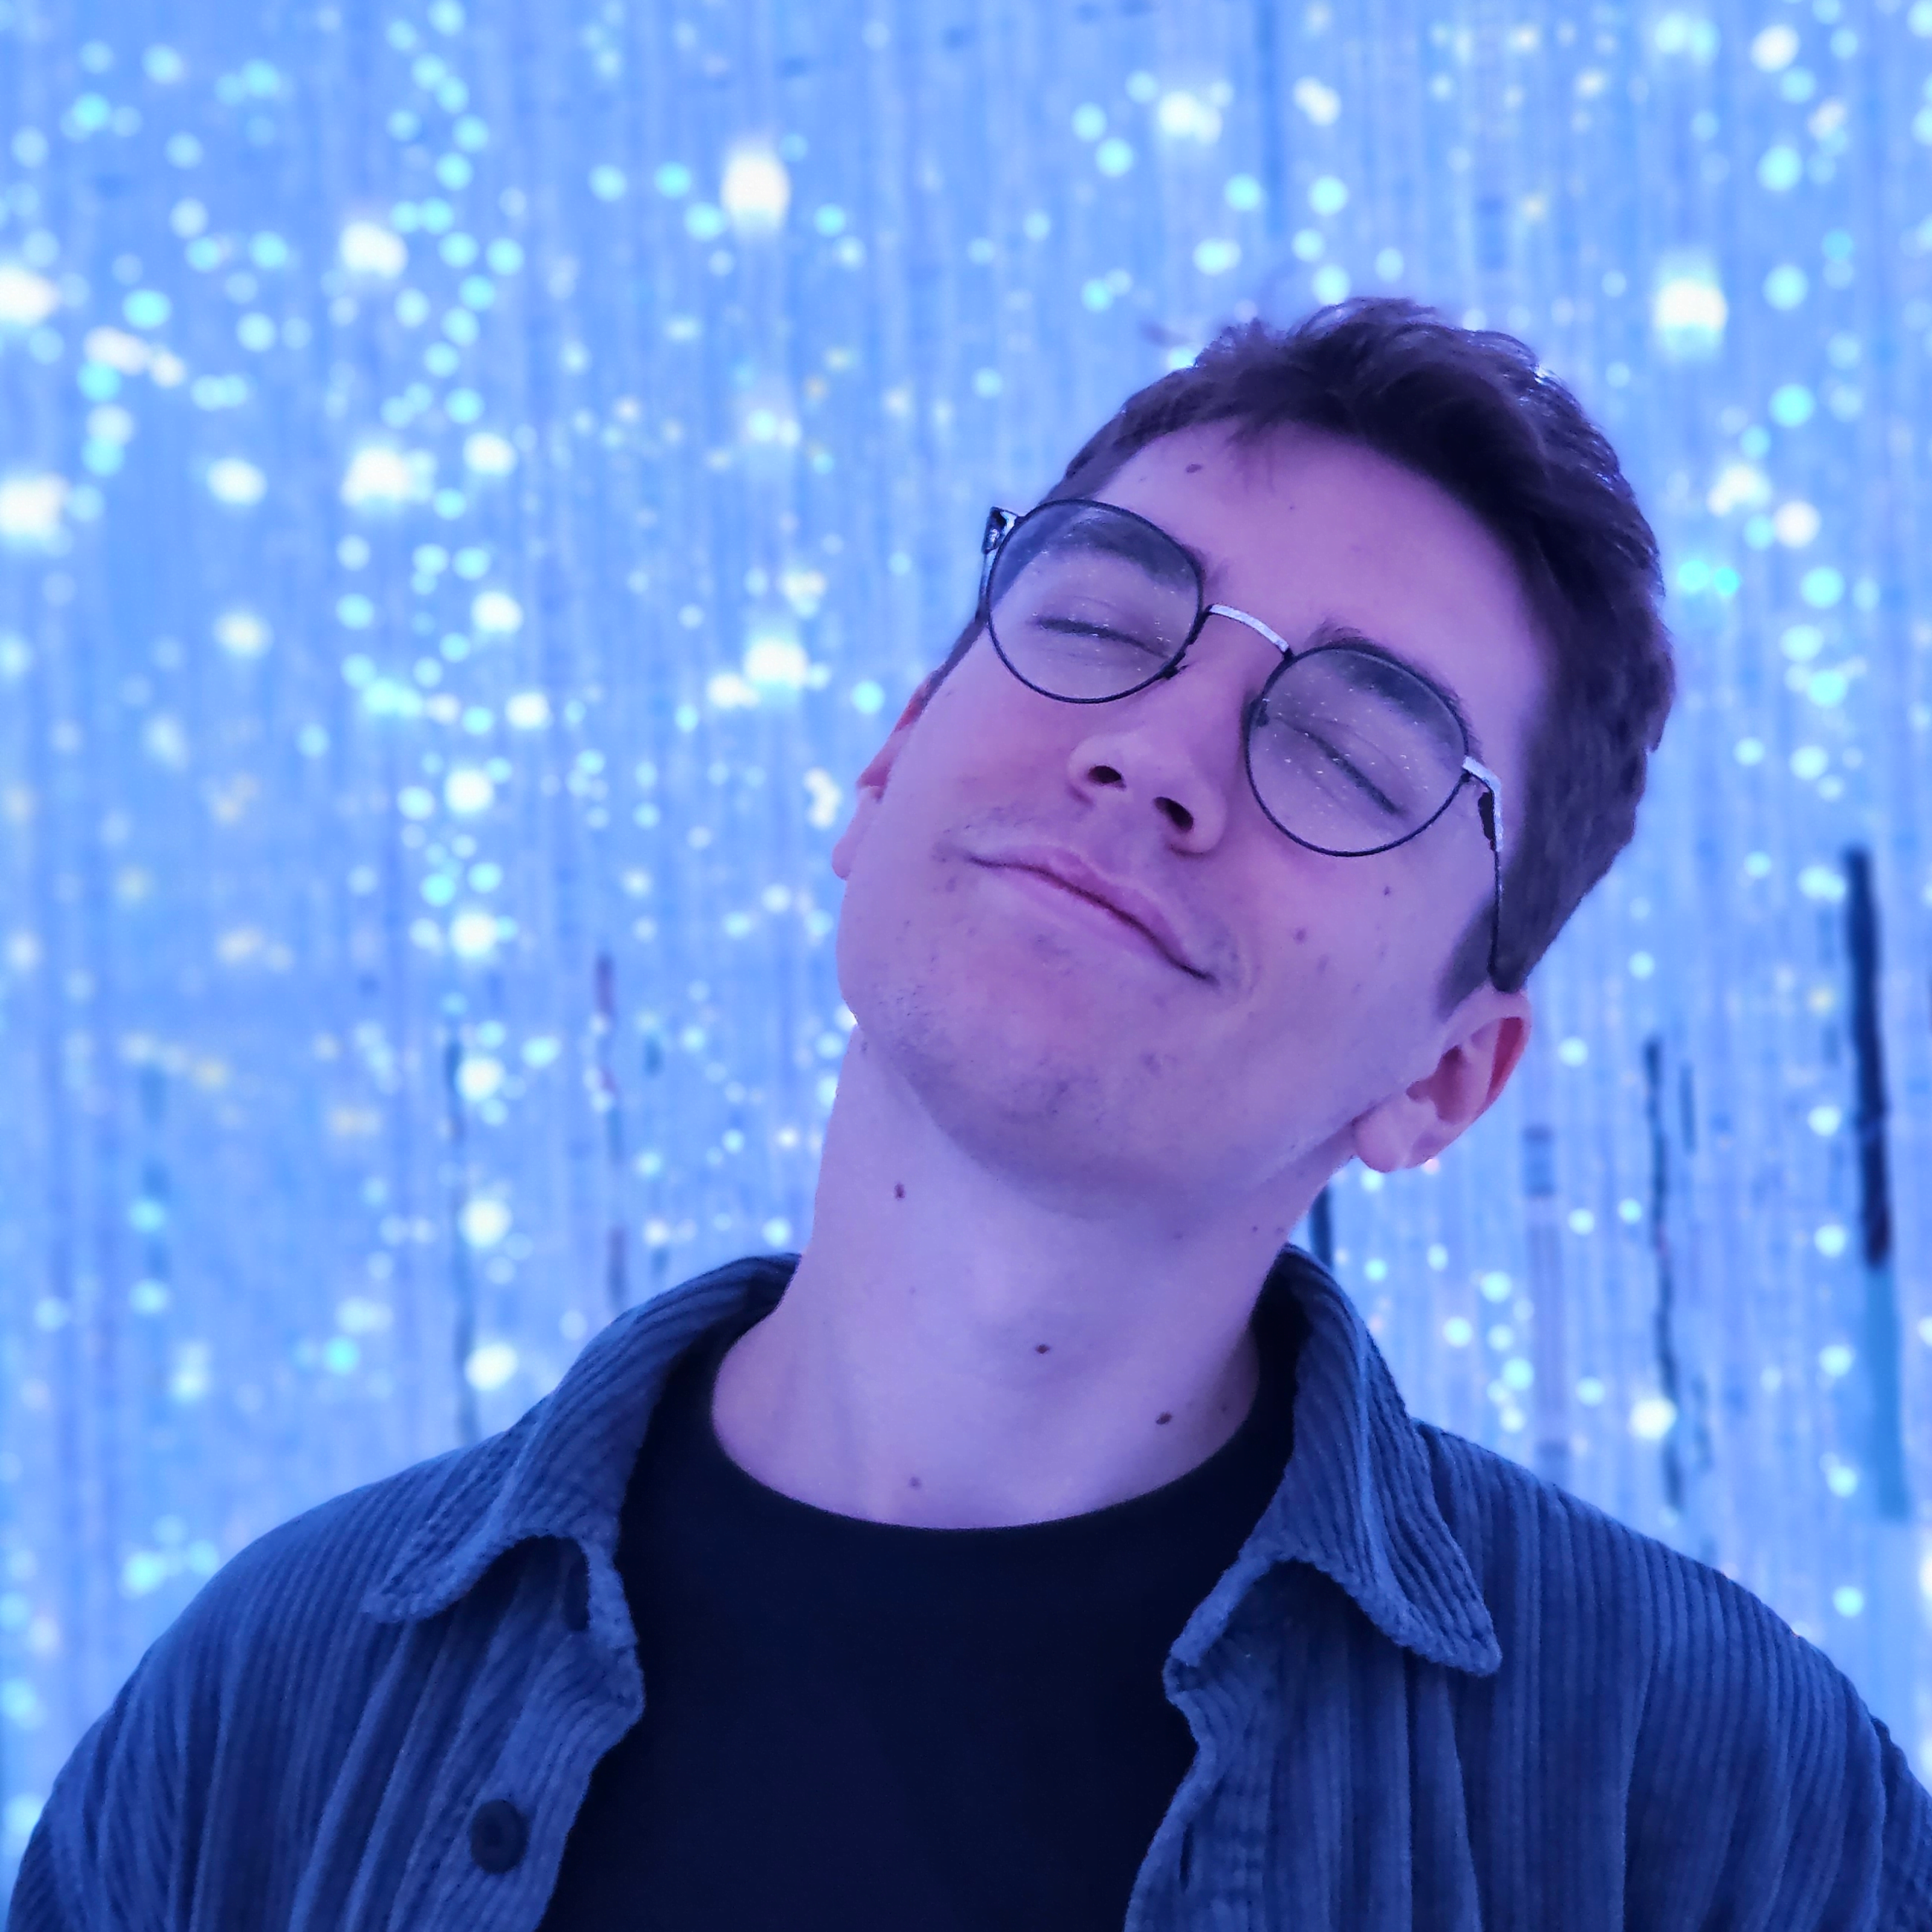 Me against the backdrop of the lighting installation